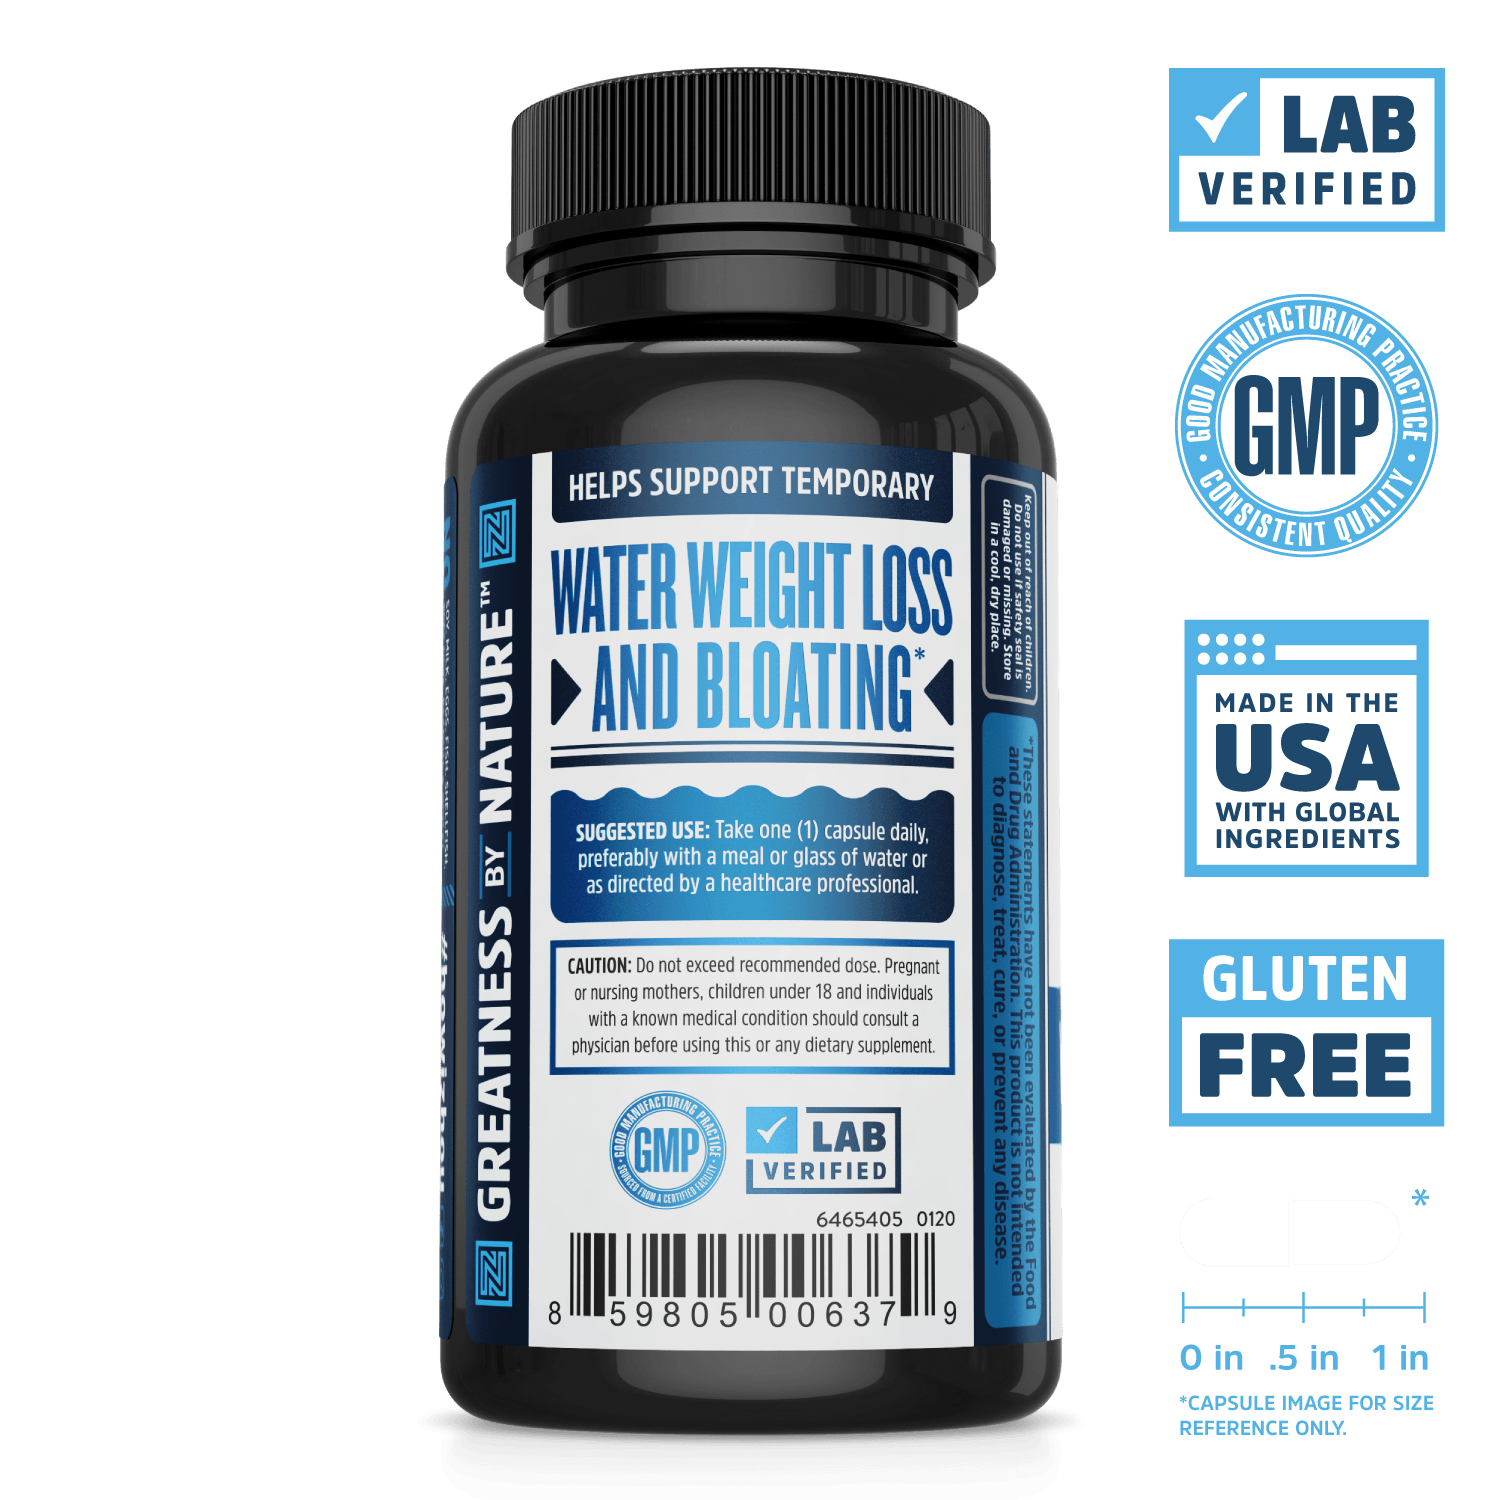 Zhou Nutrition Water Away bloating supplement. Bottle side. Lab verified, good manufacturing practices, made in the USA with global ingredients, gluten free.